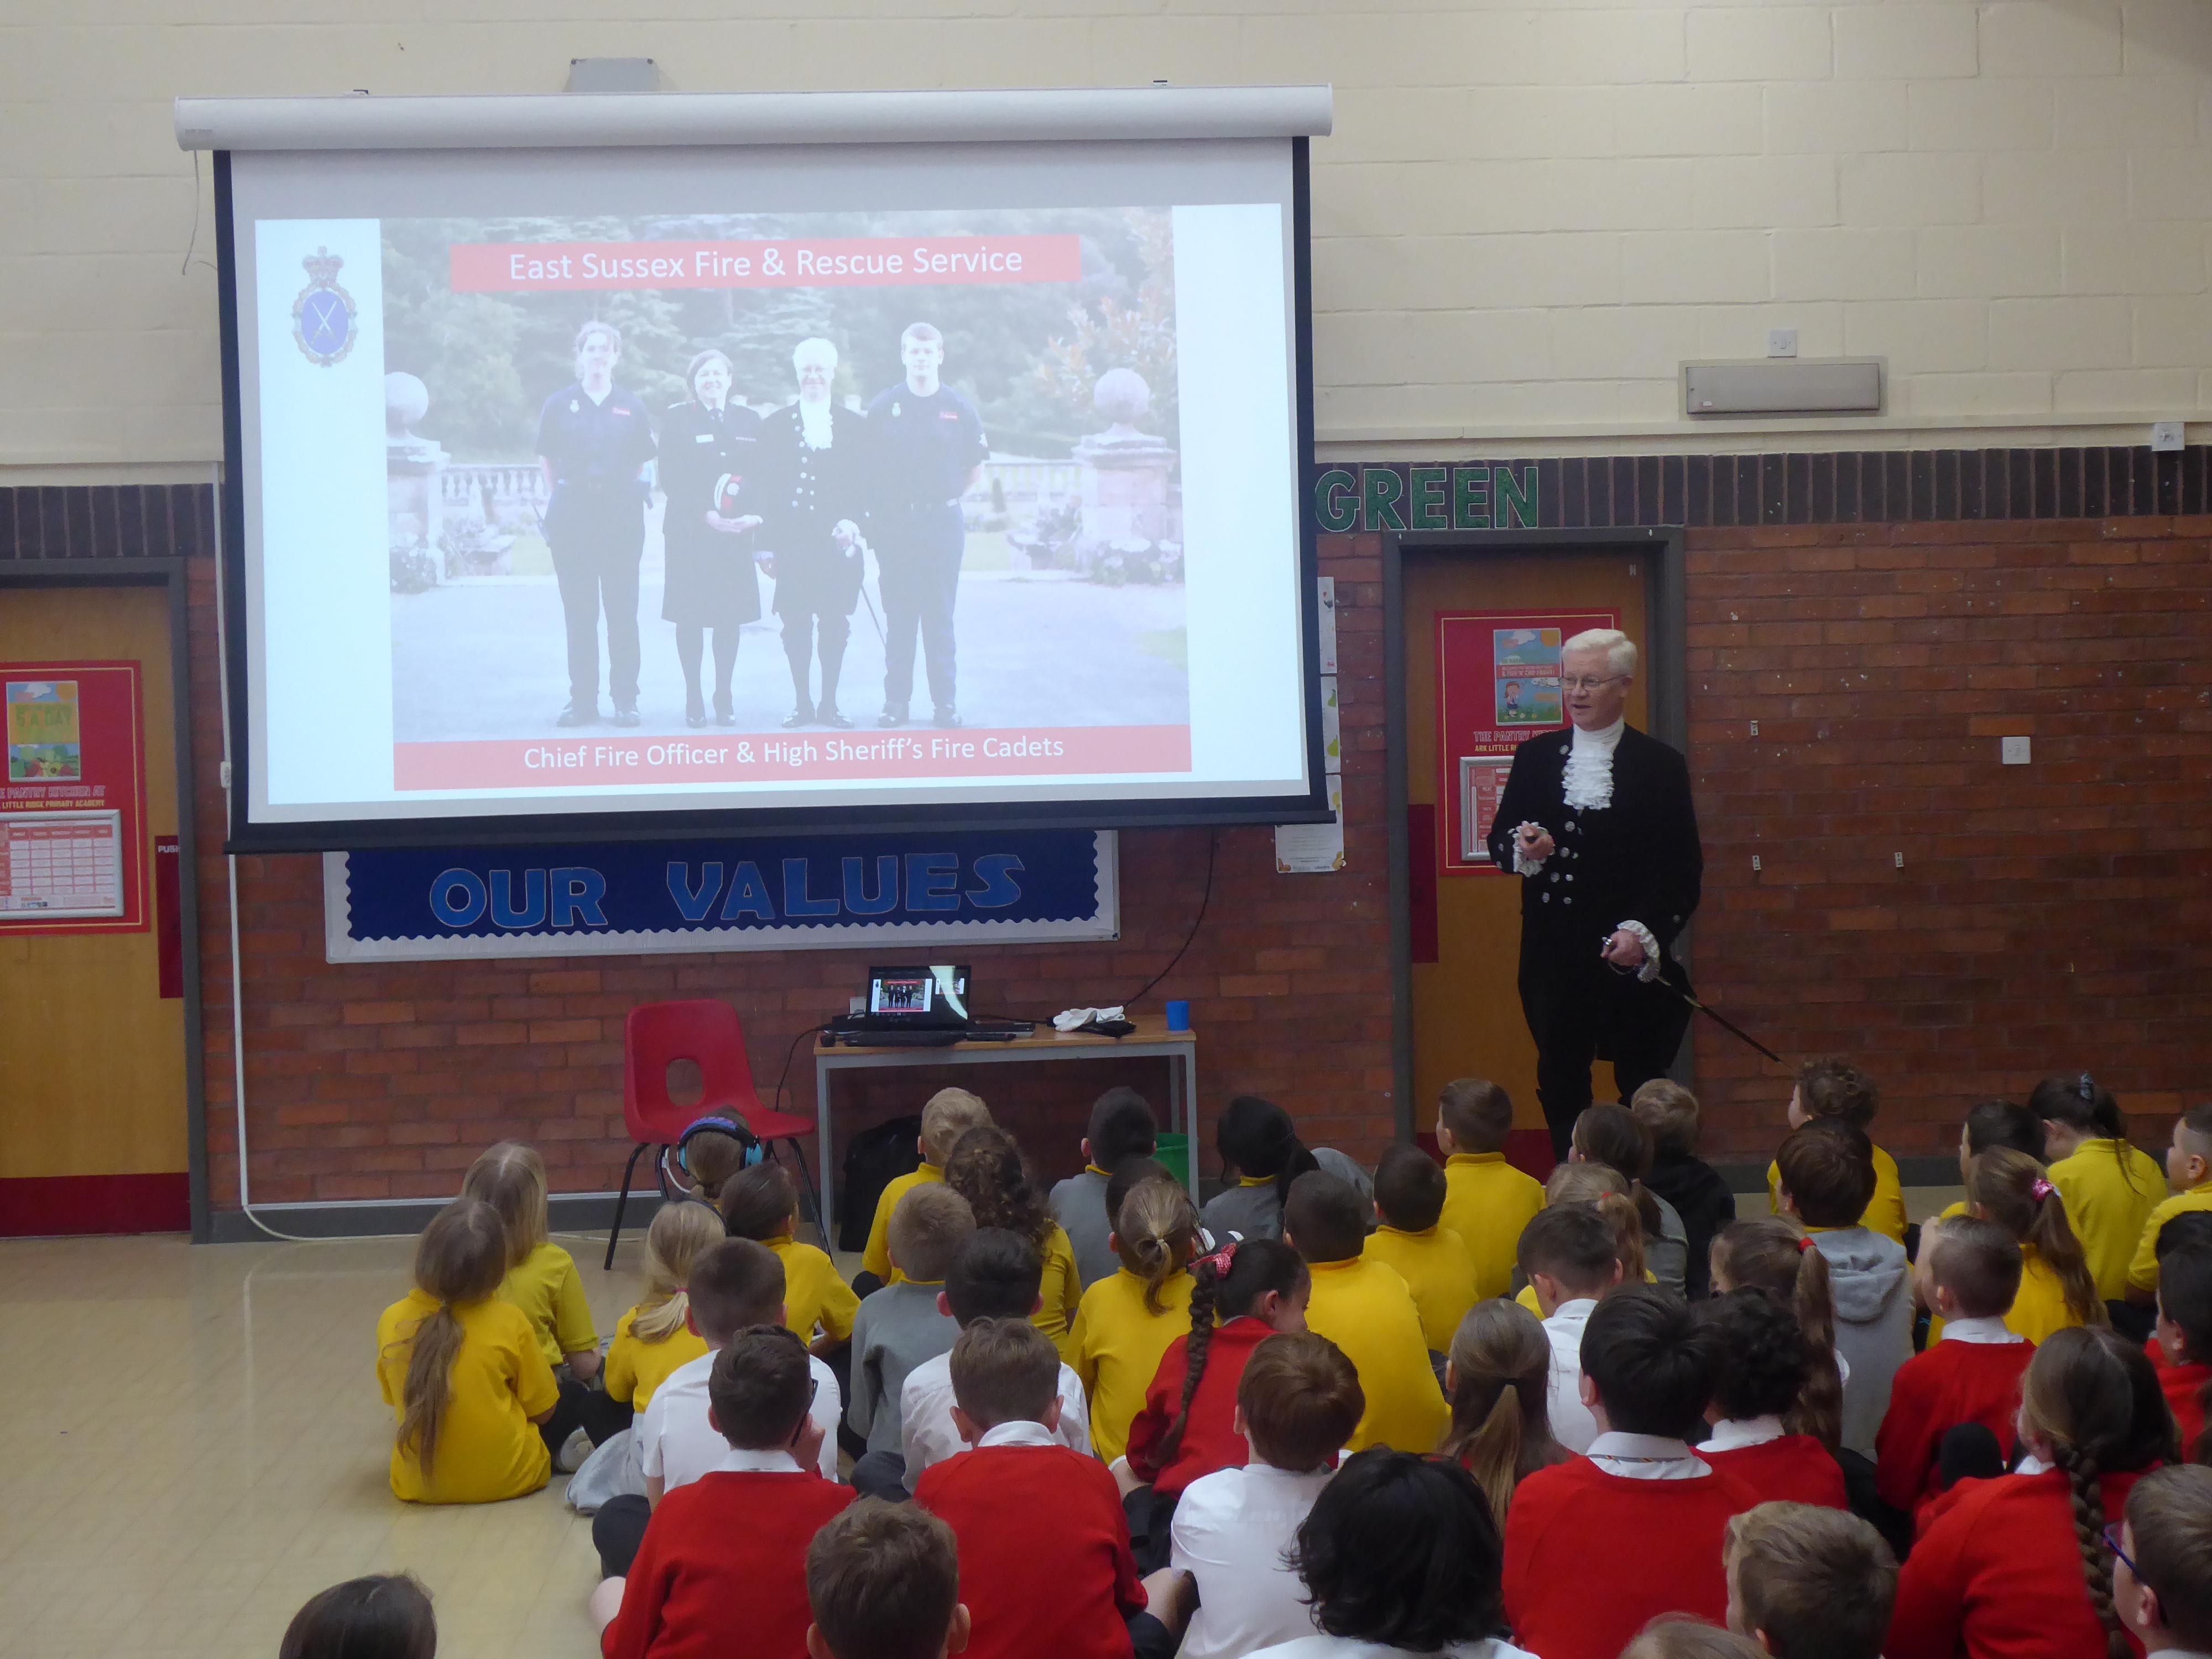 A Visit from The High Sheriff of East Sussex